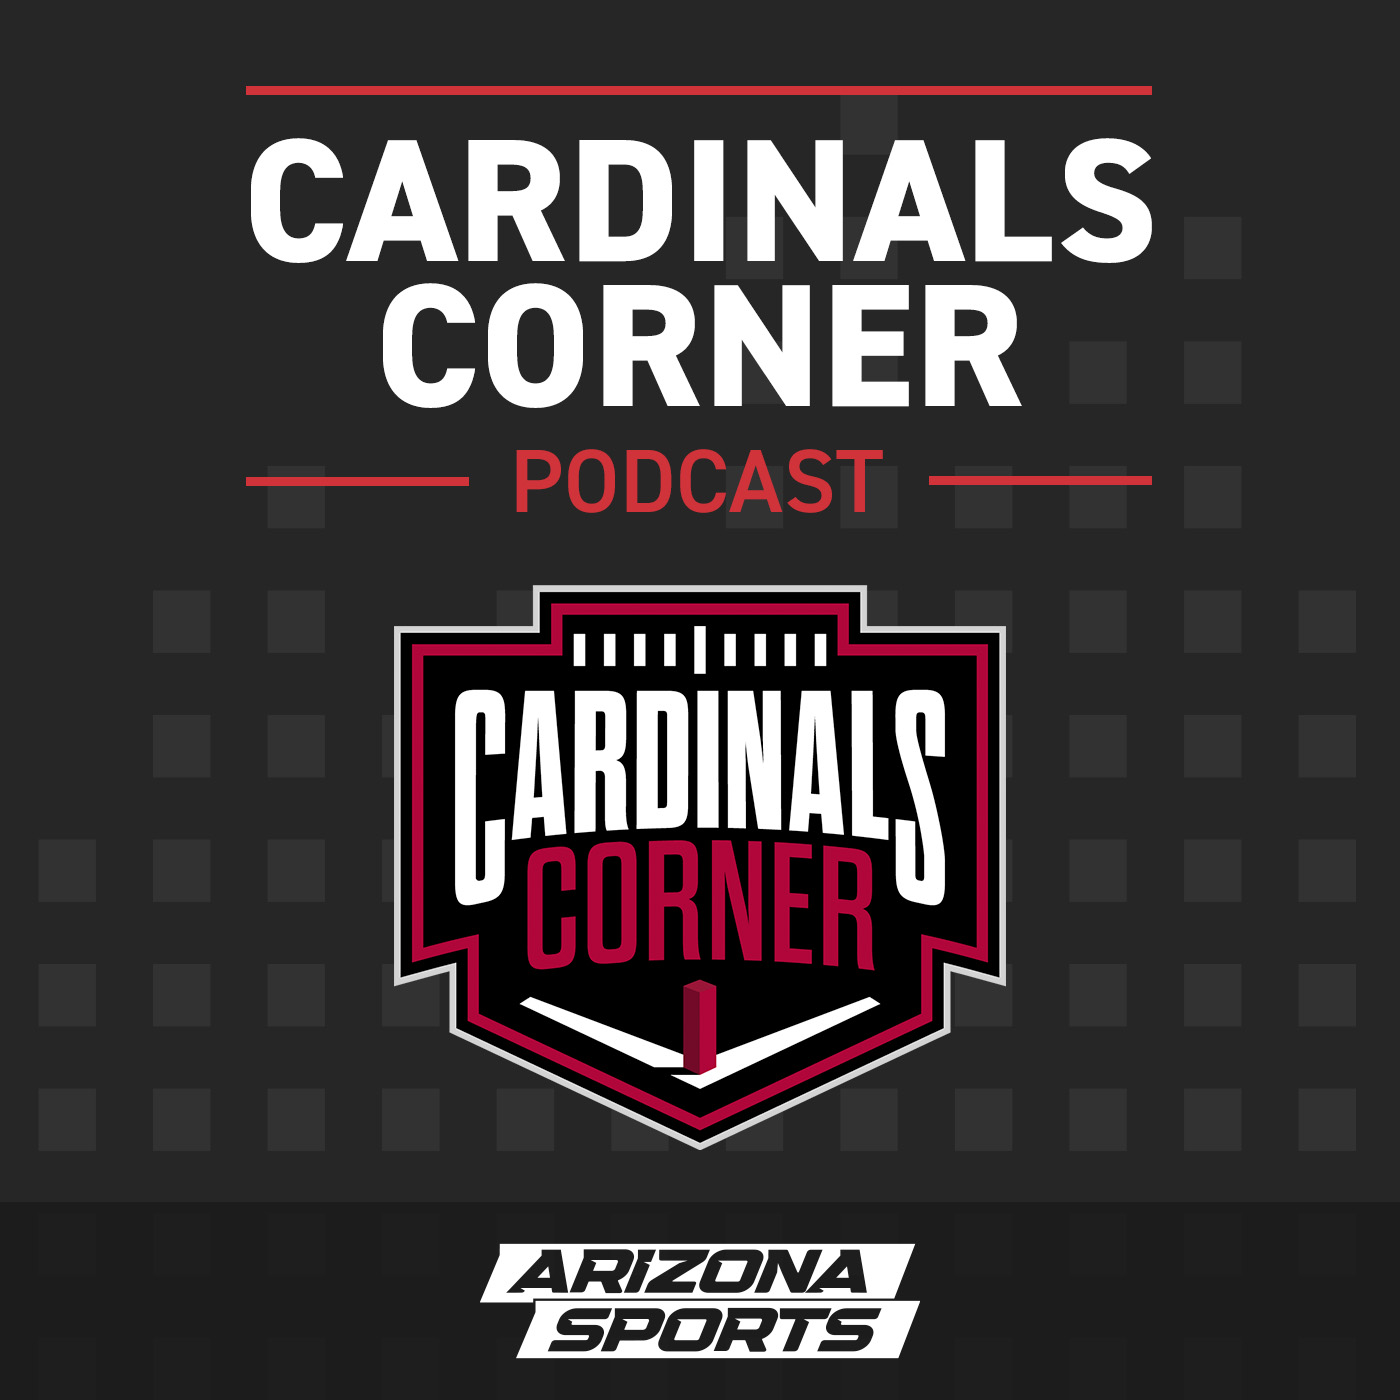 Distractions plaguing Arizona Cardinals + training camp standouts - August 5